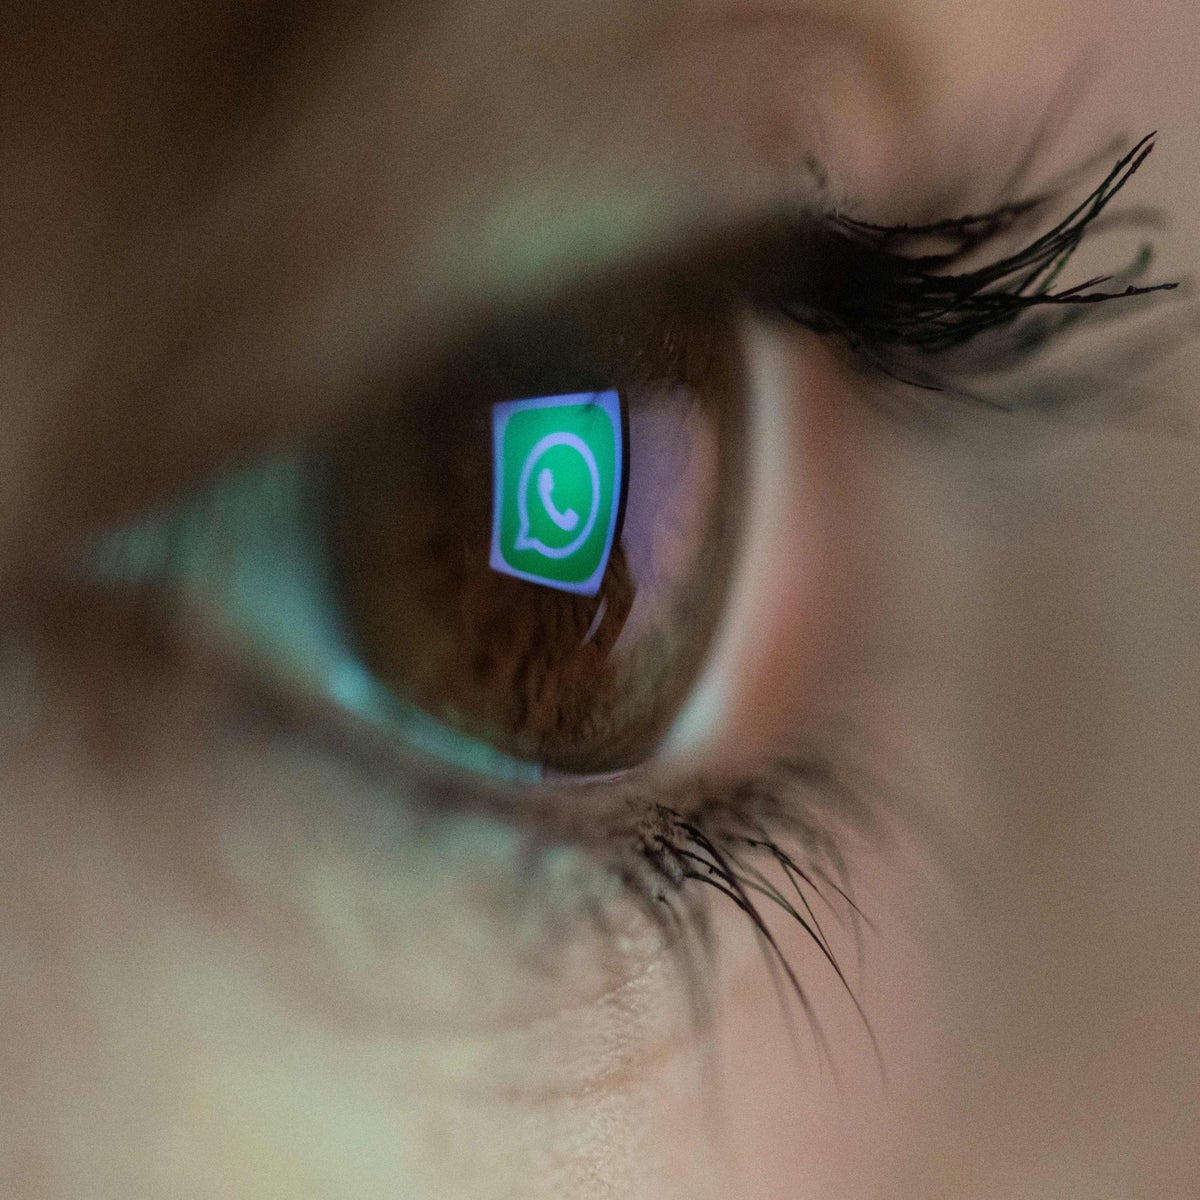 Whatsappxxx - WhatsApp is hotbed for child sex abuse videos in India, study finds | The  Independent | The Independent